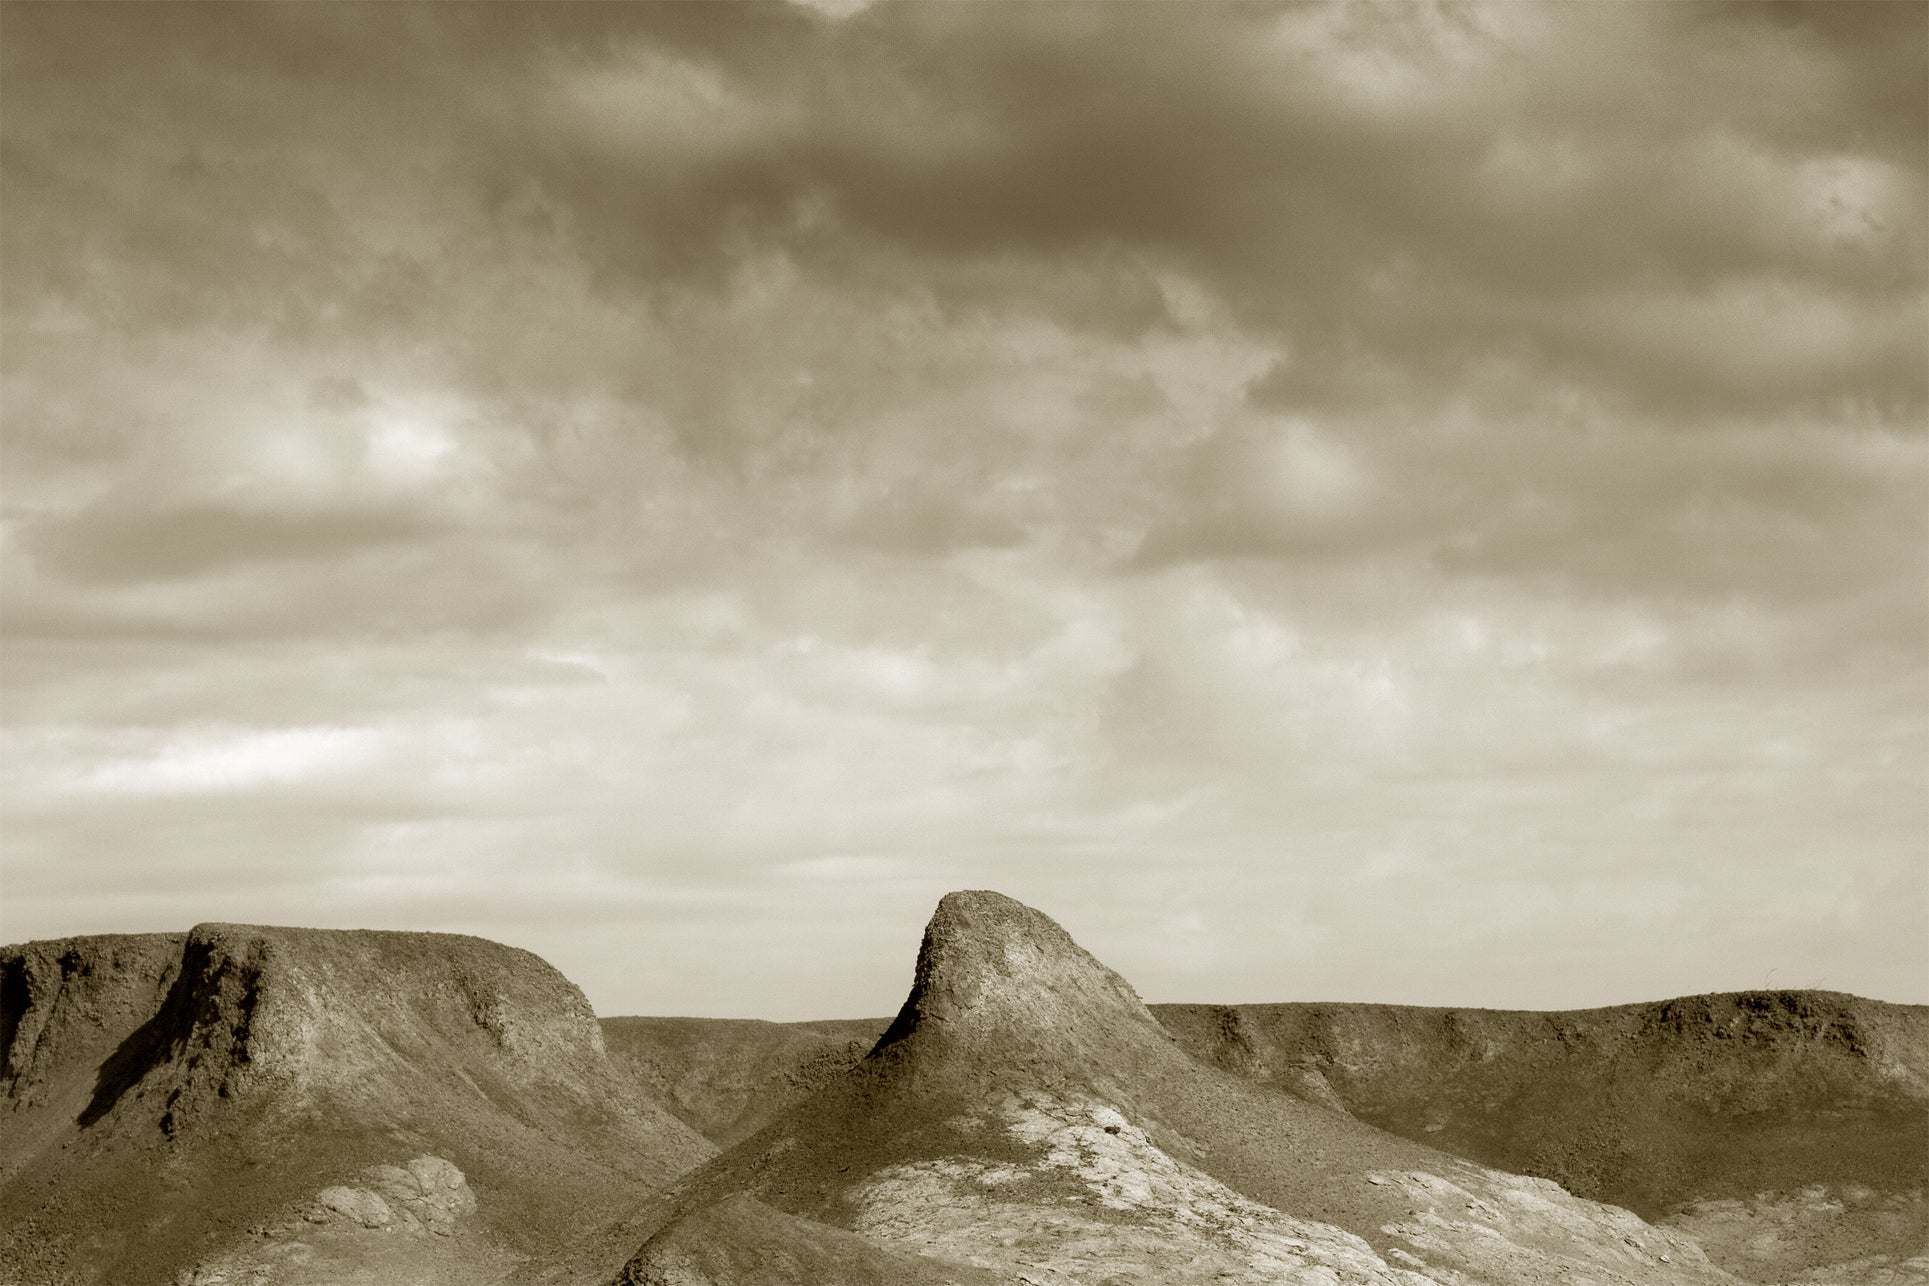 A photograph of the desert in sepia tones.